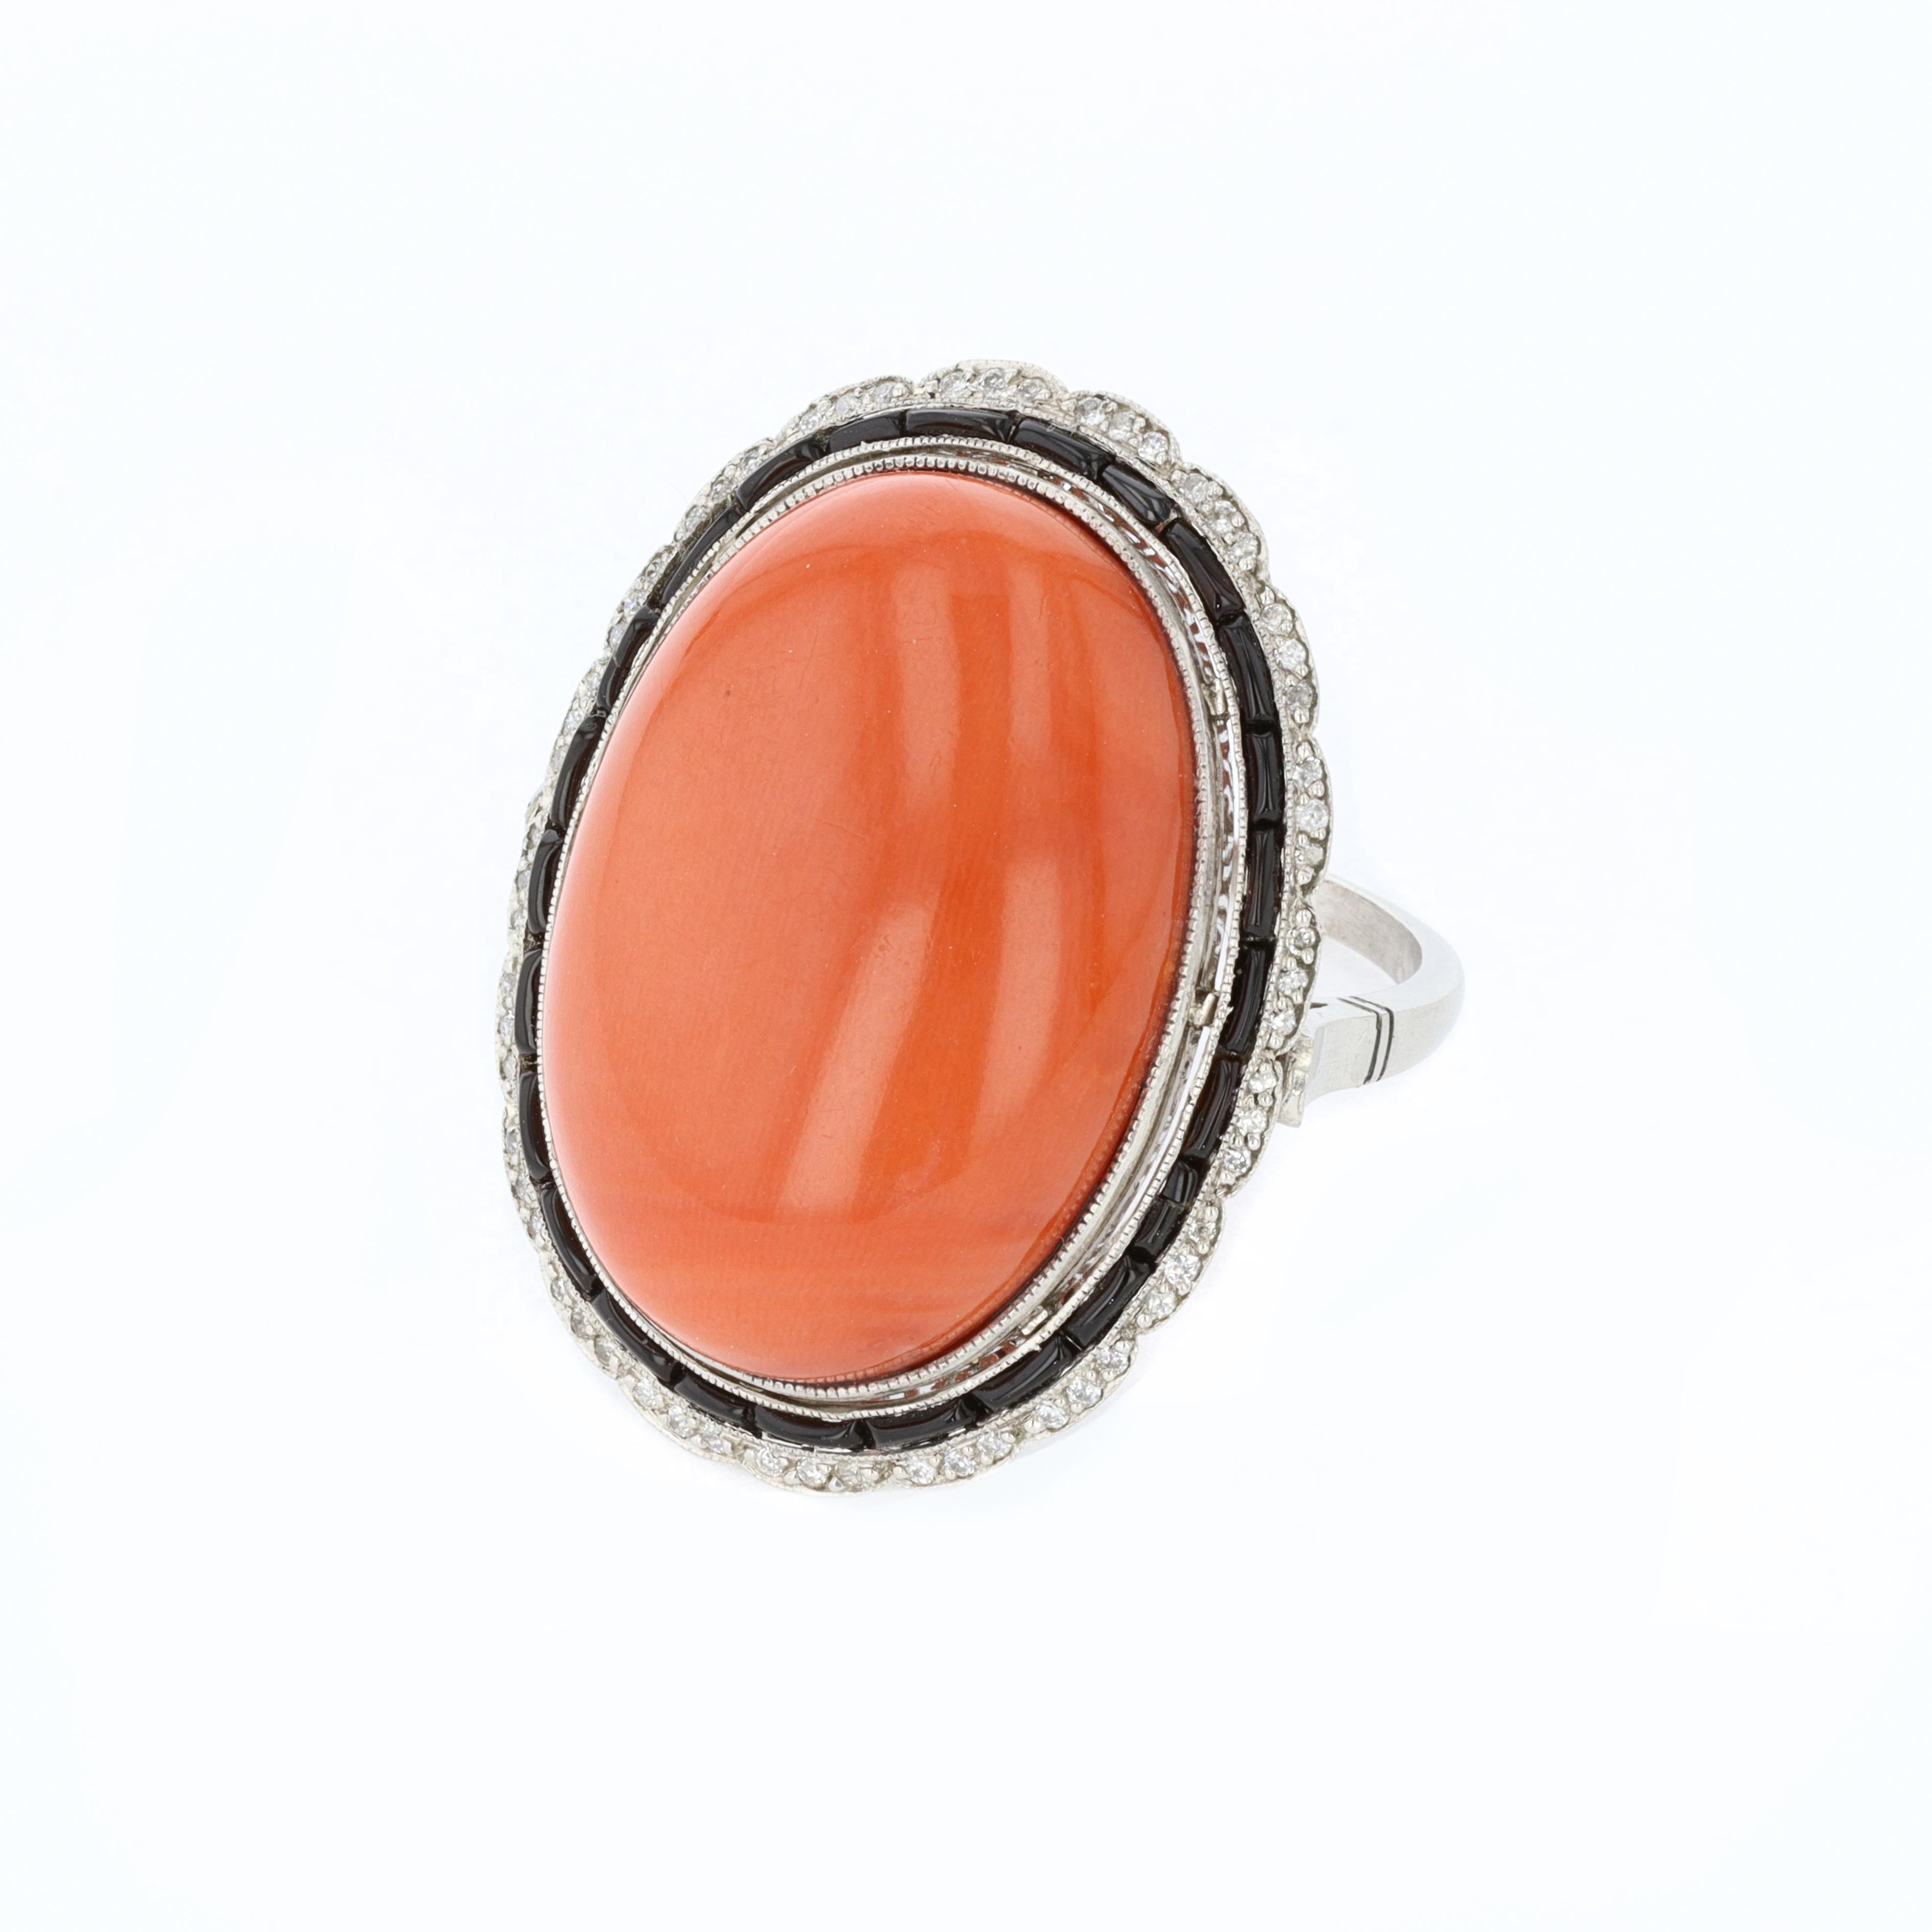 Ladies platinum cabachon coral and black onyx Art Deco cocktail ring. The center of the ring is a cabachon coral that is surrounded by calibre cut onyx and round cut diamonds. The weight of the diamonds is .25 ctw and the color and clarity is H VS.